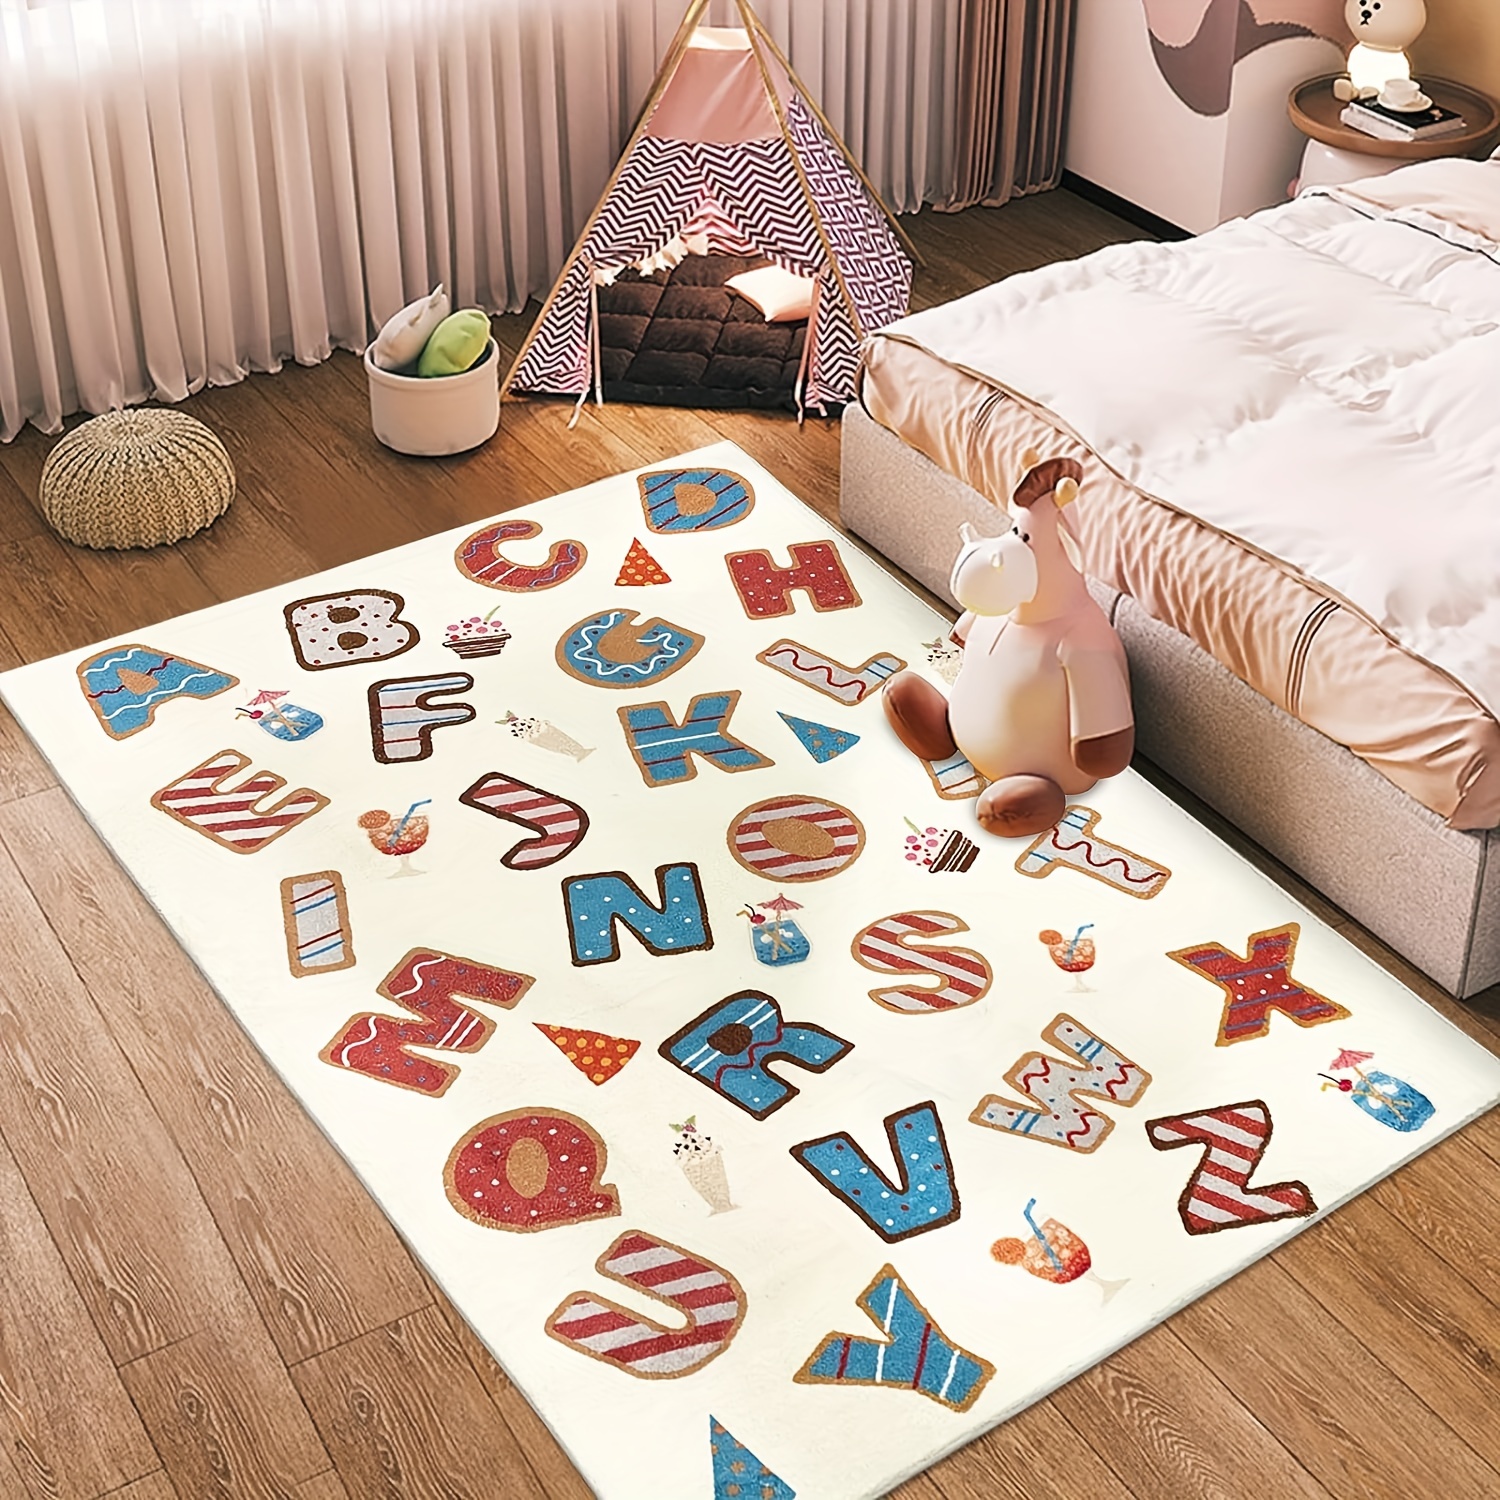 Aesthetic Bedside Rugs Floor Entryway Rugs for Bedroom, Machine Washable  Extra Soft Comfortable Carpet, Non-Slip Small Area Rug for Kids Puppy Home